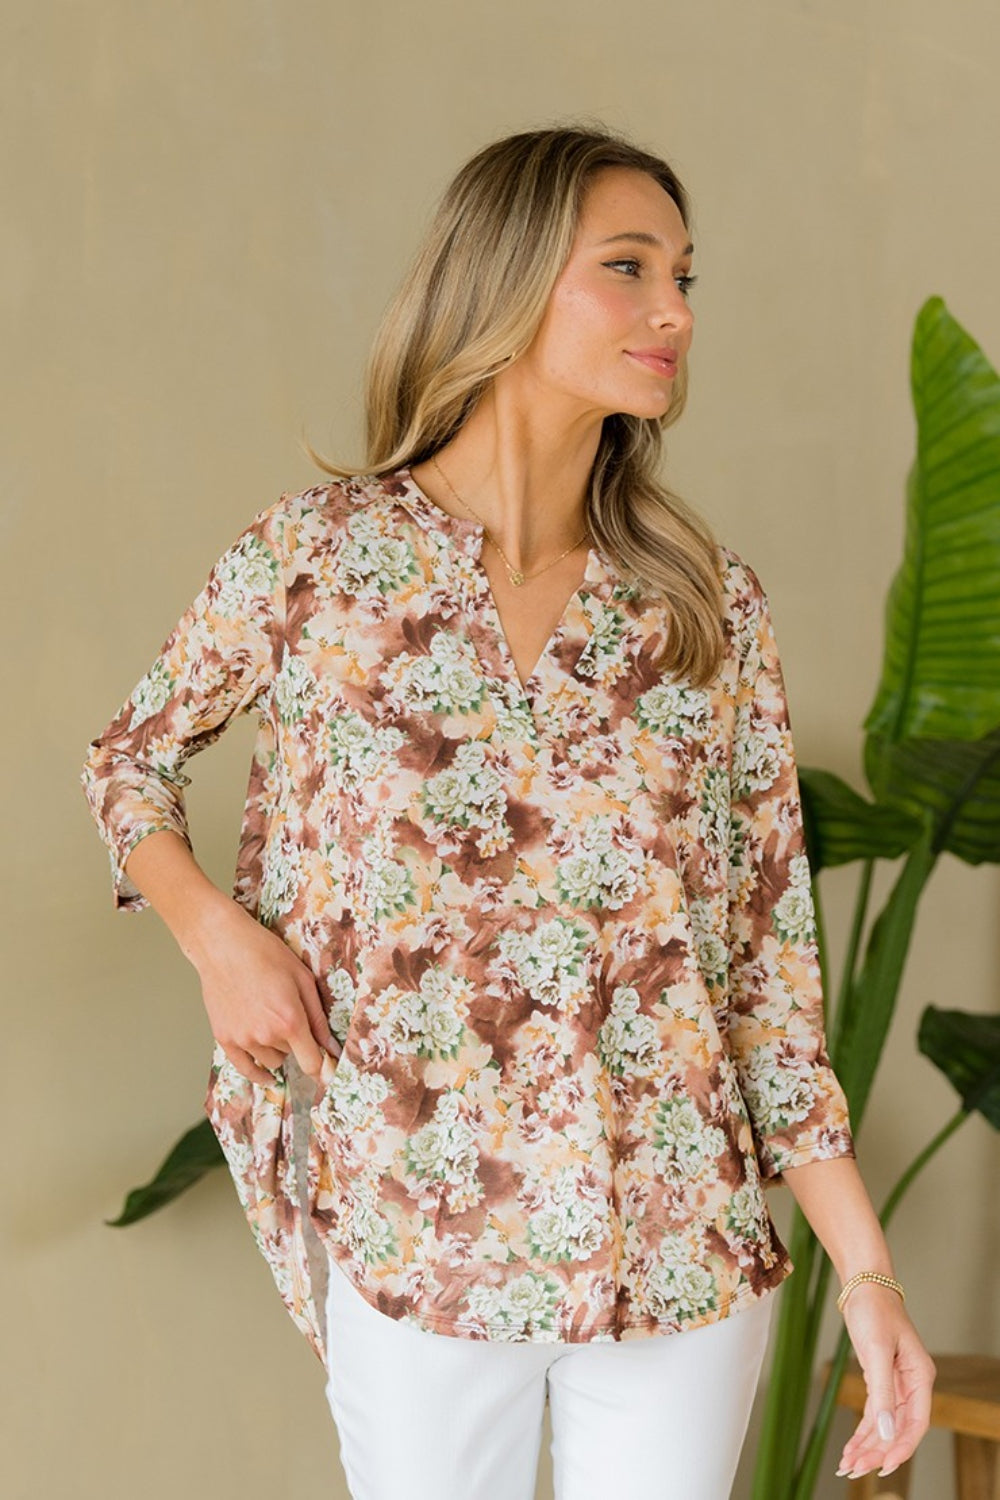 Versatile floral print blouse perfect for various occasions